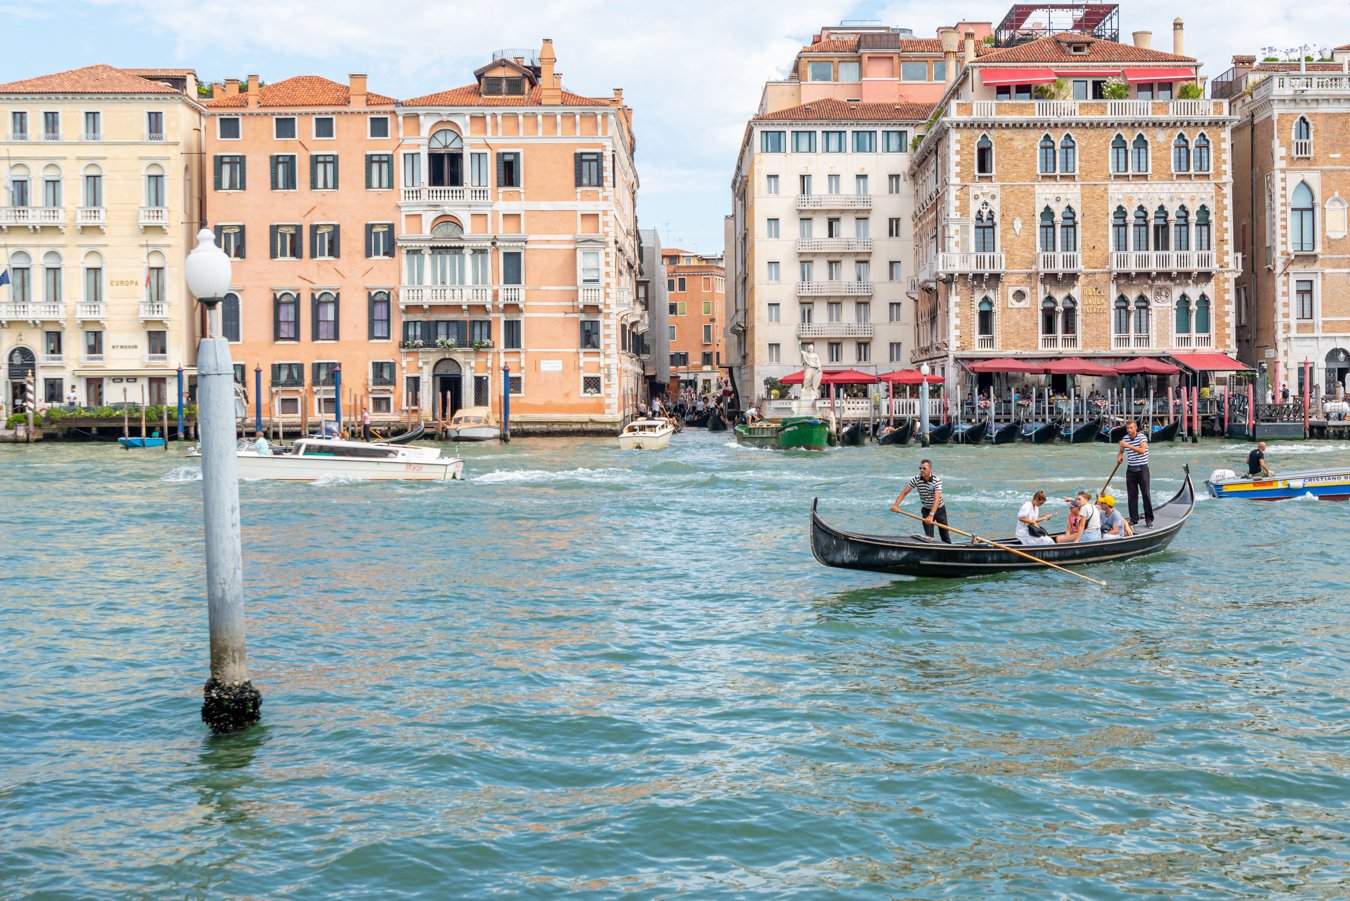 gondola traghetto in venice with passengers approaching from grand canal